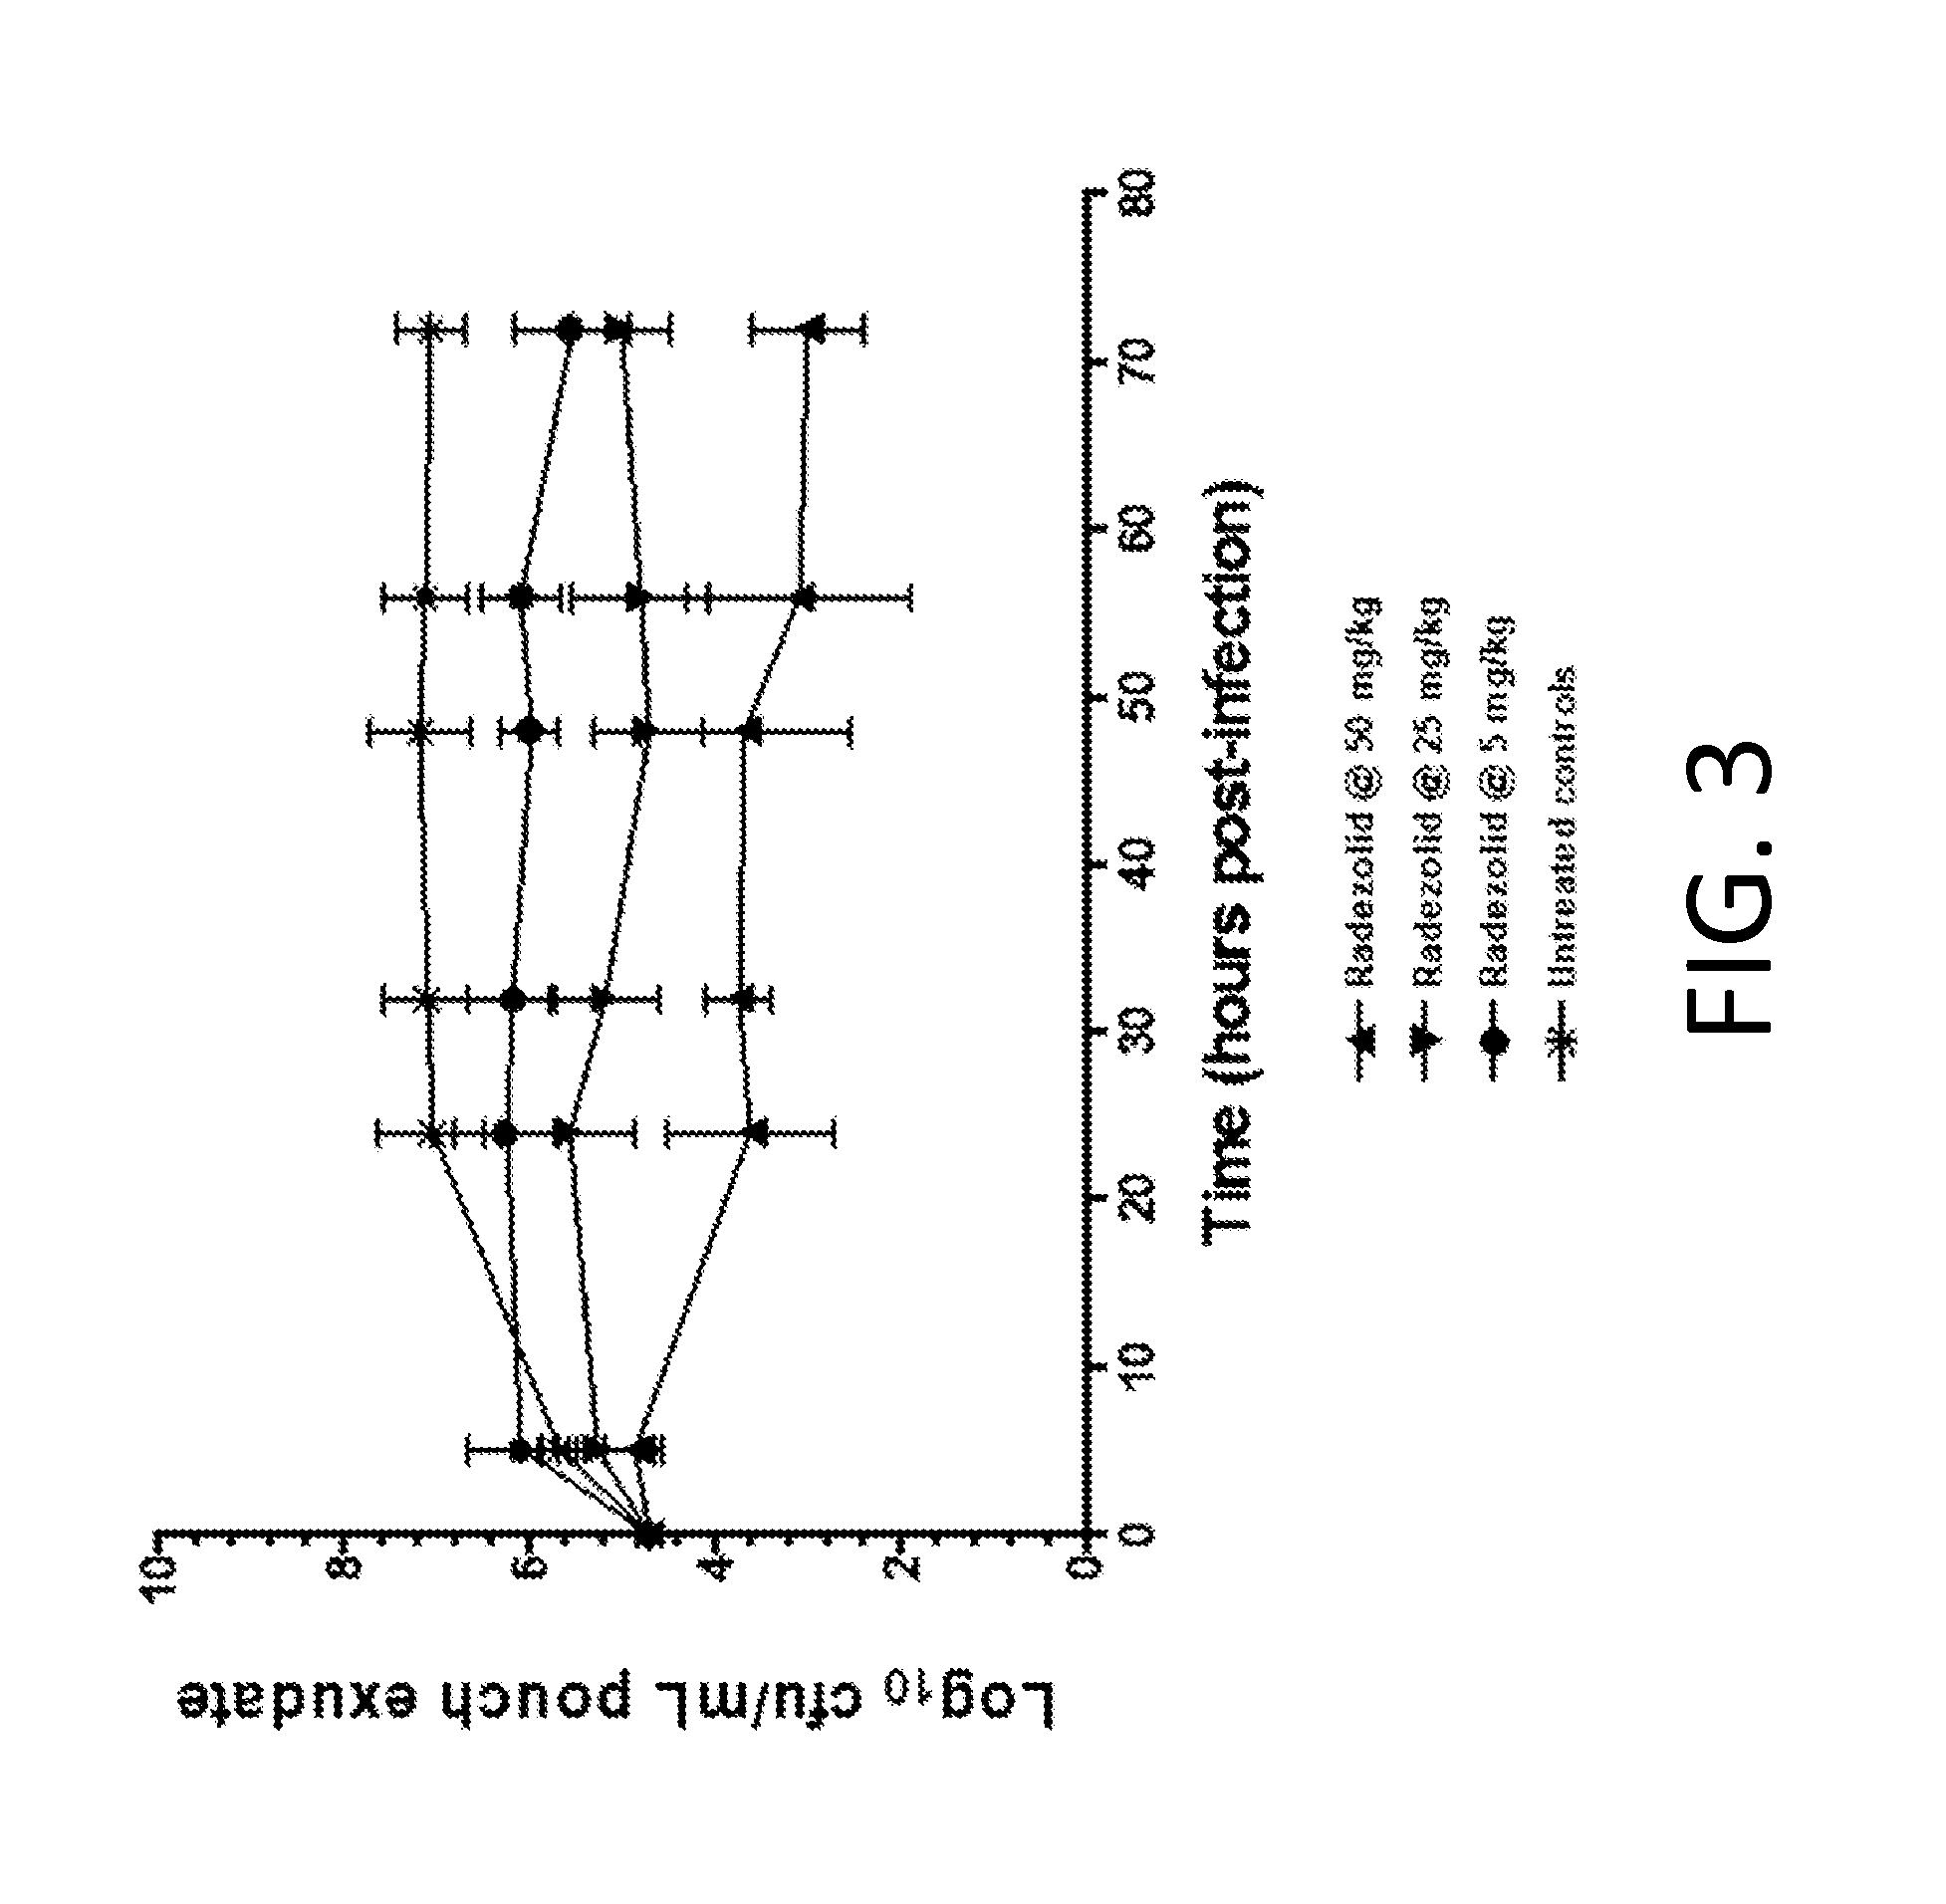 Method for treating, preventing, or reducing the risk of skin infection